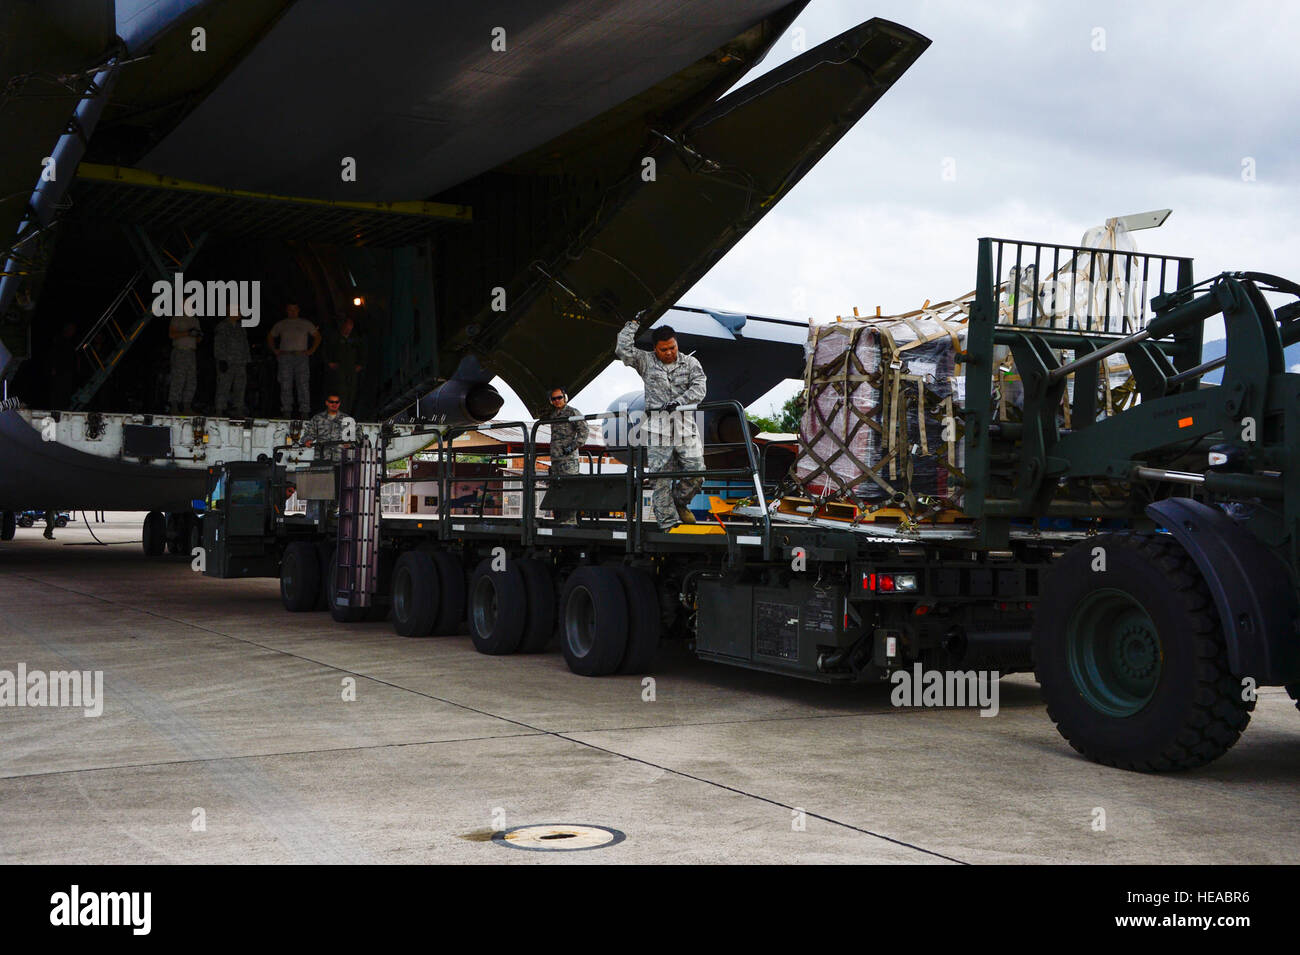 Crew members of a C-5 Galaxy from Westover Air Reserve Base, Mass., and members from the 612th Air Base Squadron unload a shipment of donated goods at Soto Cano Air Base, Honduras, Oct. 11, 2014.  The cargo transporting aircraft delivered over 6,000-pounds of humanitarian aid and supplies that were donated to Honduran citizens in need through the Denton Program.  The Denton Program allows private U.S. citizens and organizations to use space available on U.S. military cargo planes to transport humanitarian goods to approved countries in need. Tech. Sgt. Heather Redman) Stock Photo